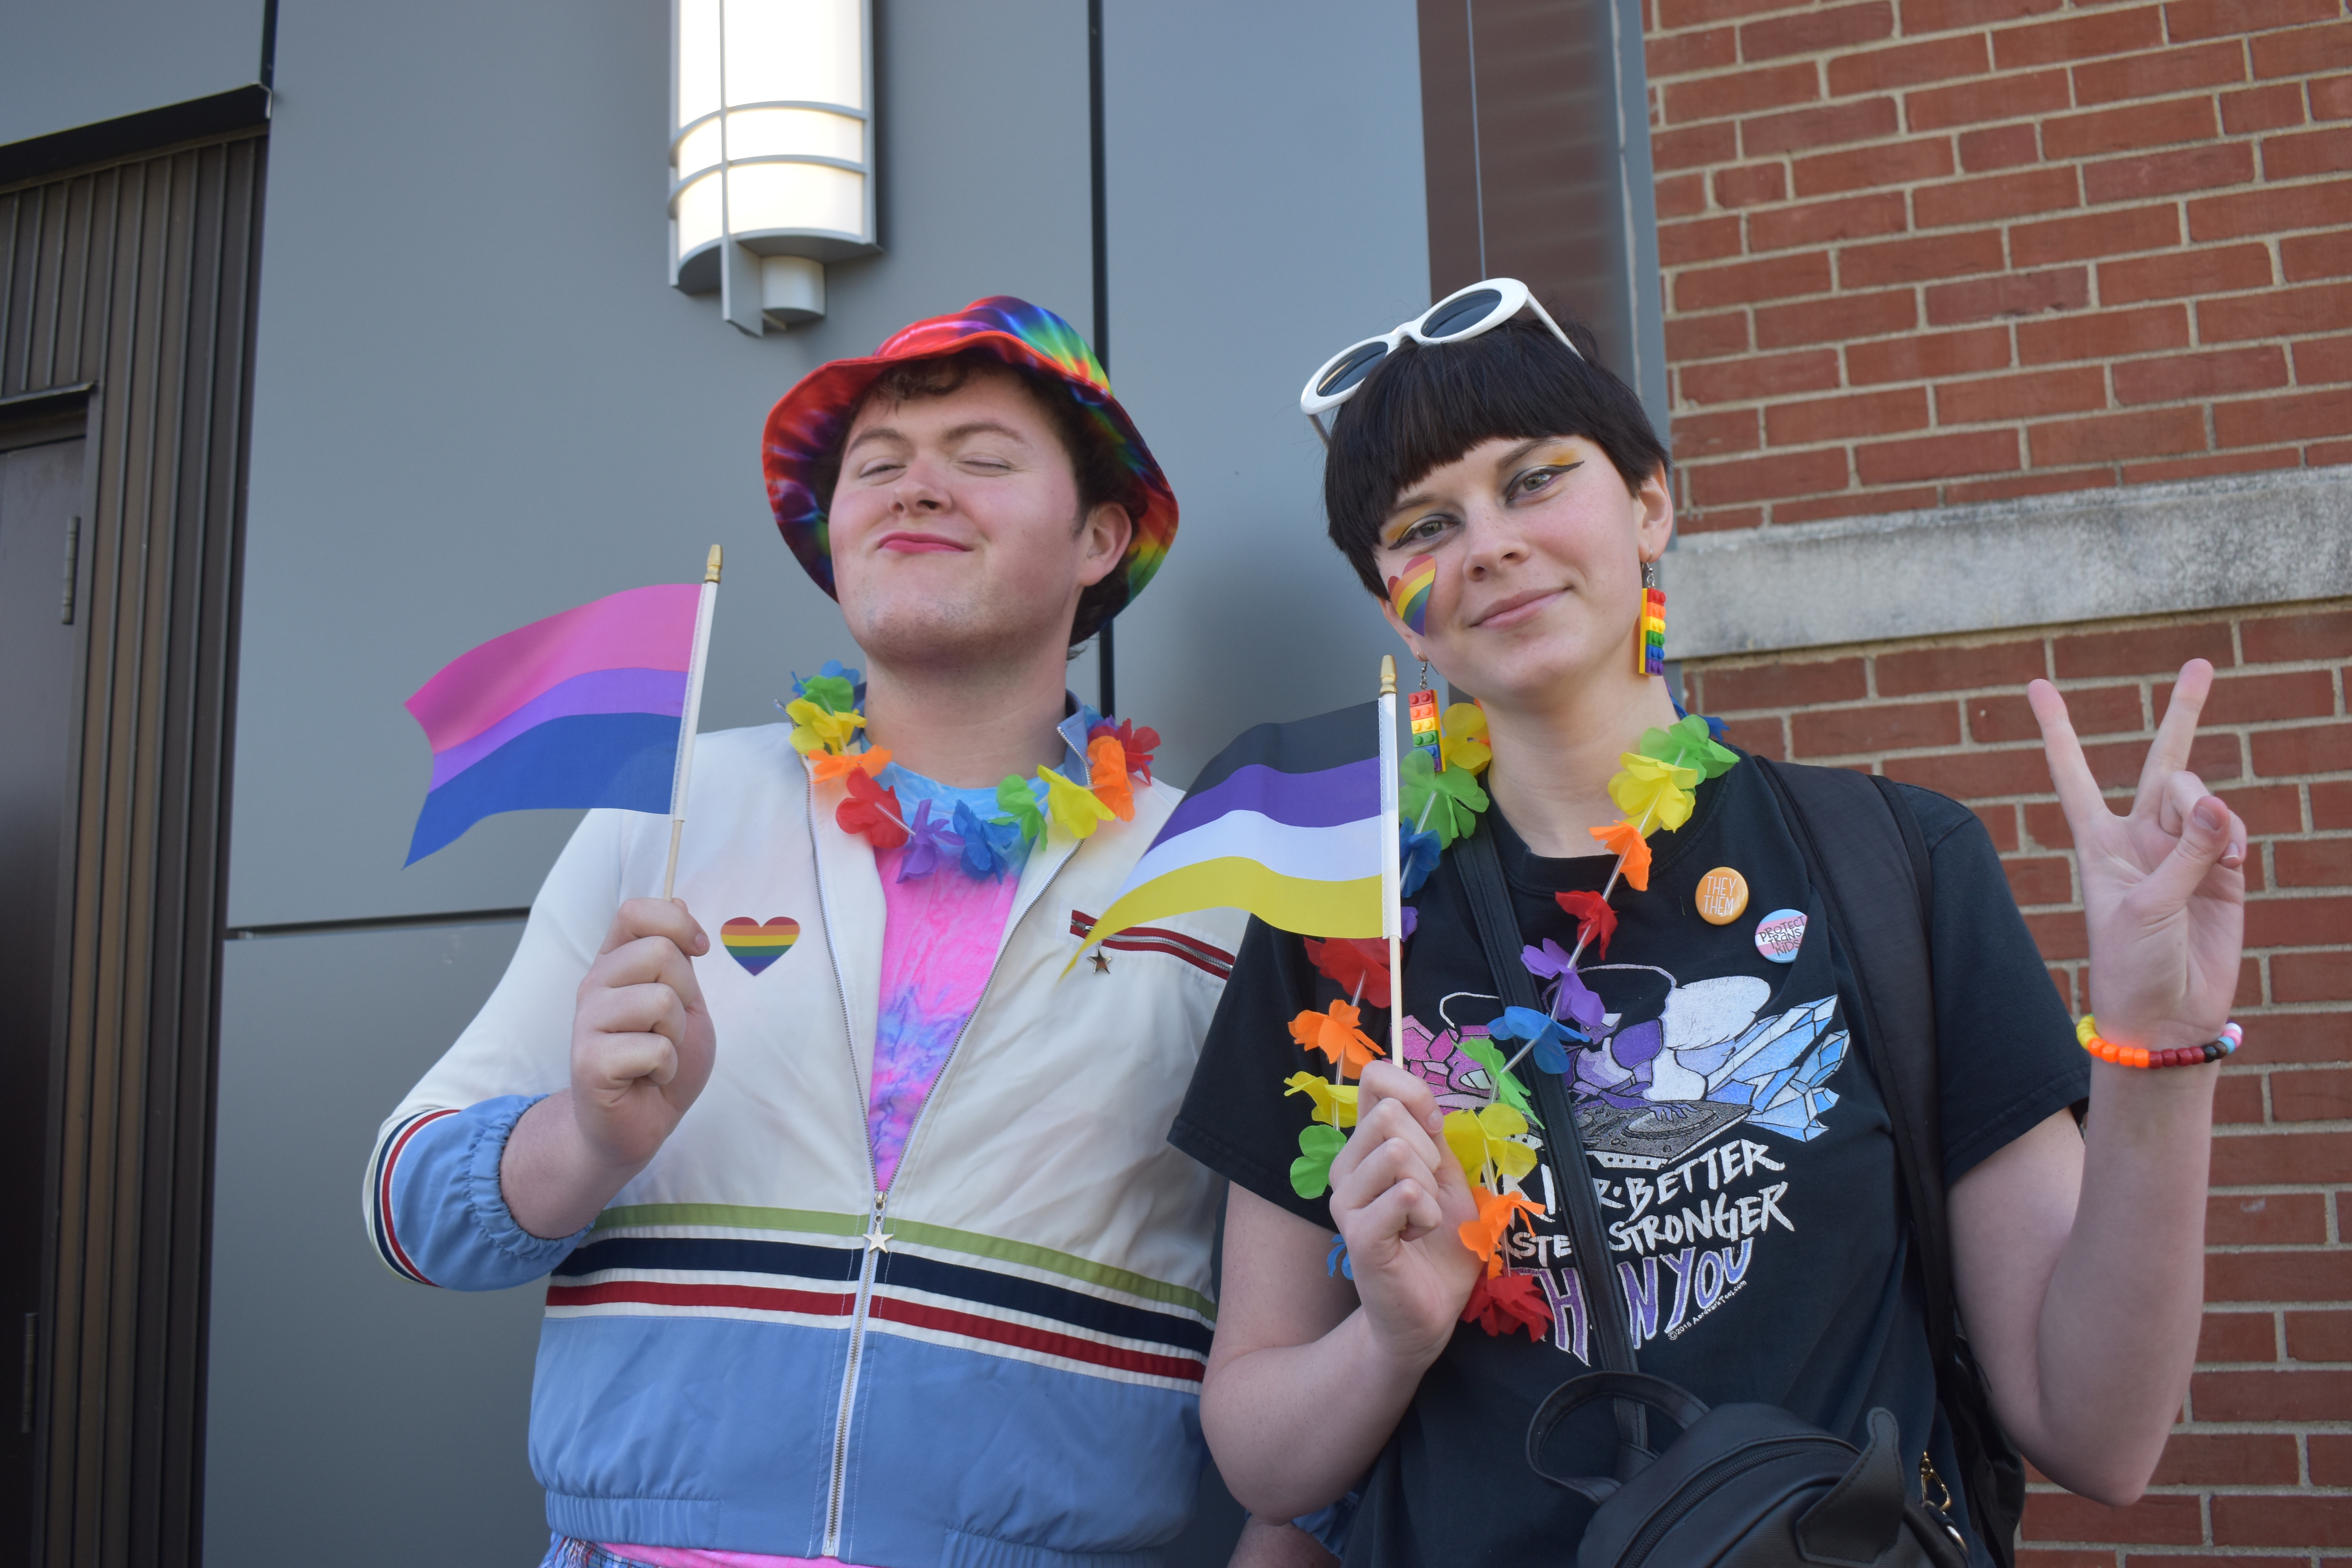 2 VU students wearing colorful clothing and accessories while holding colorful flags